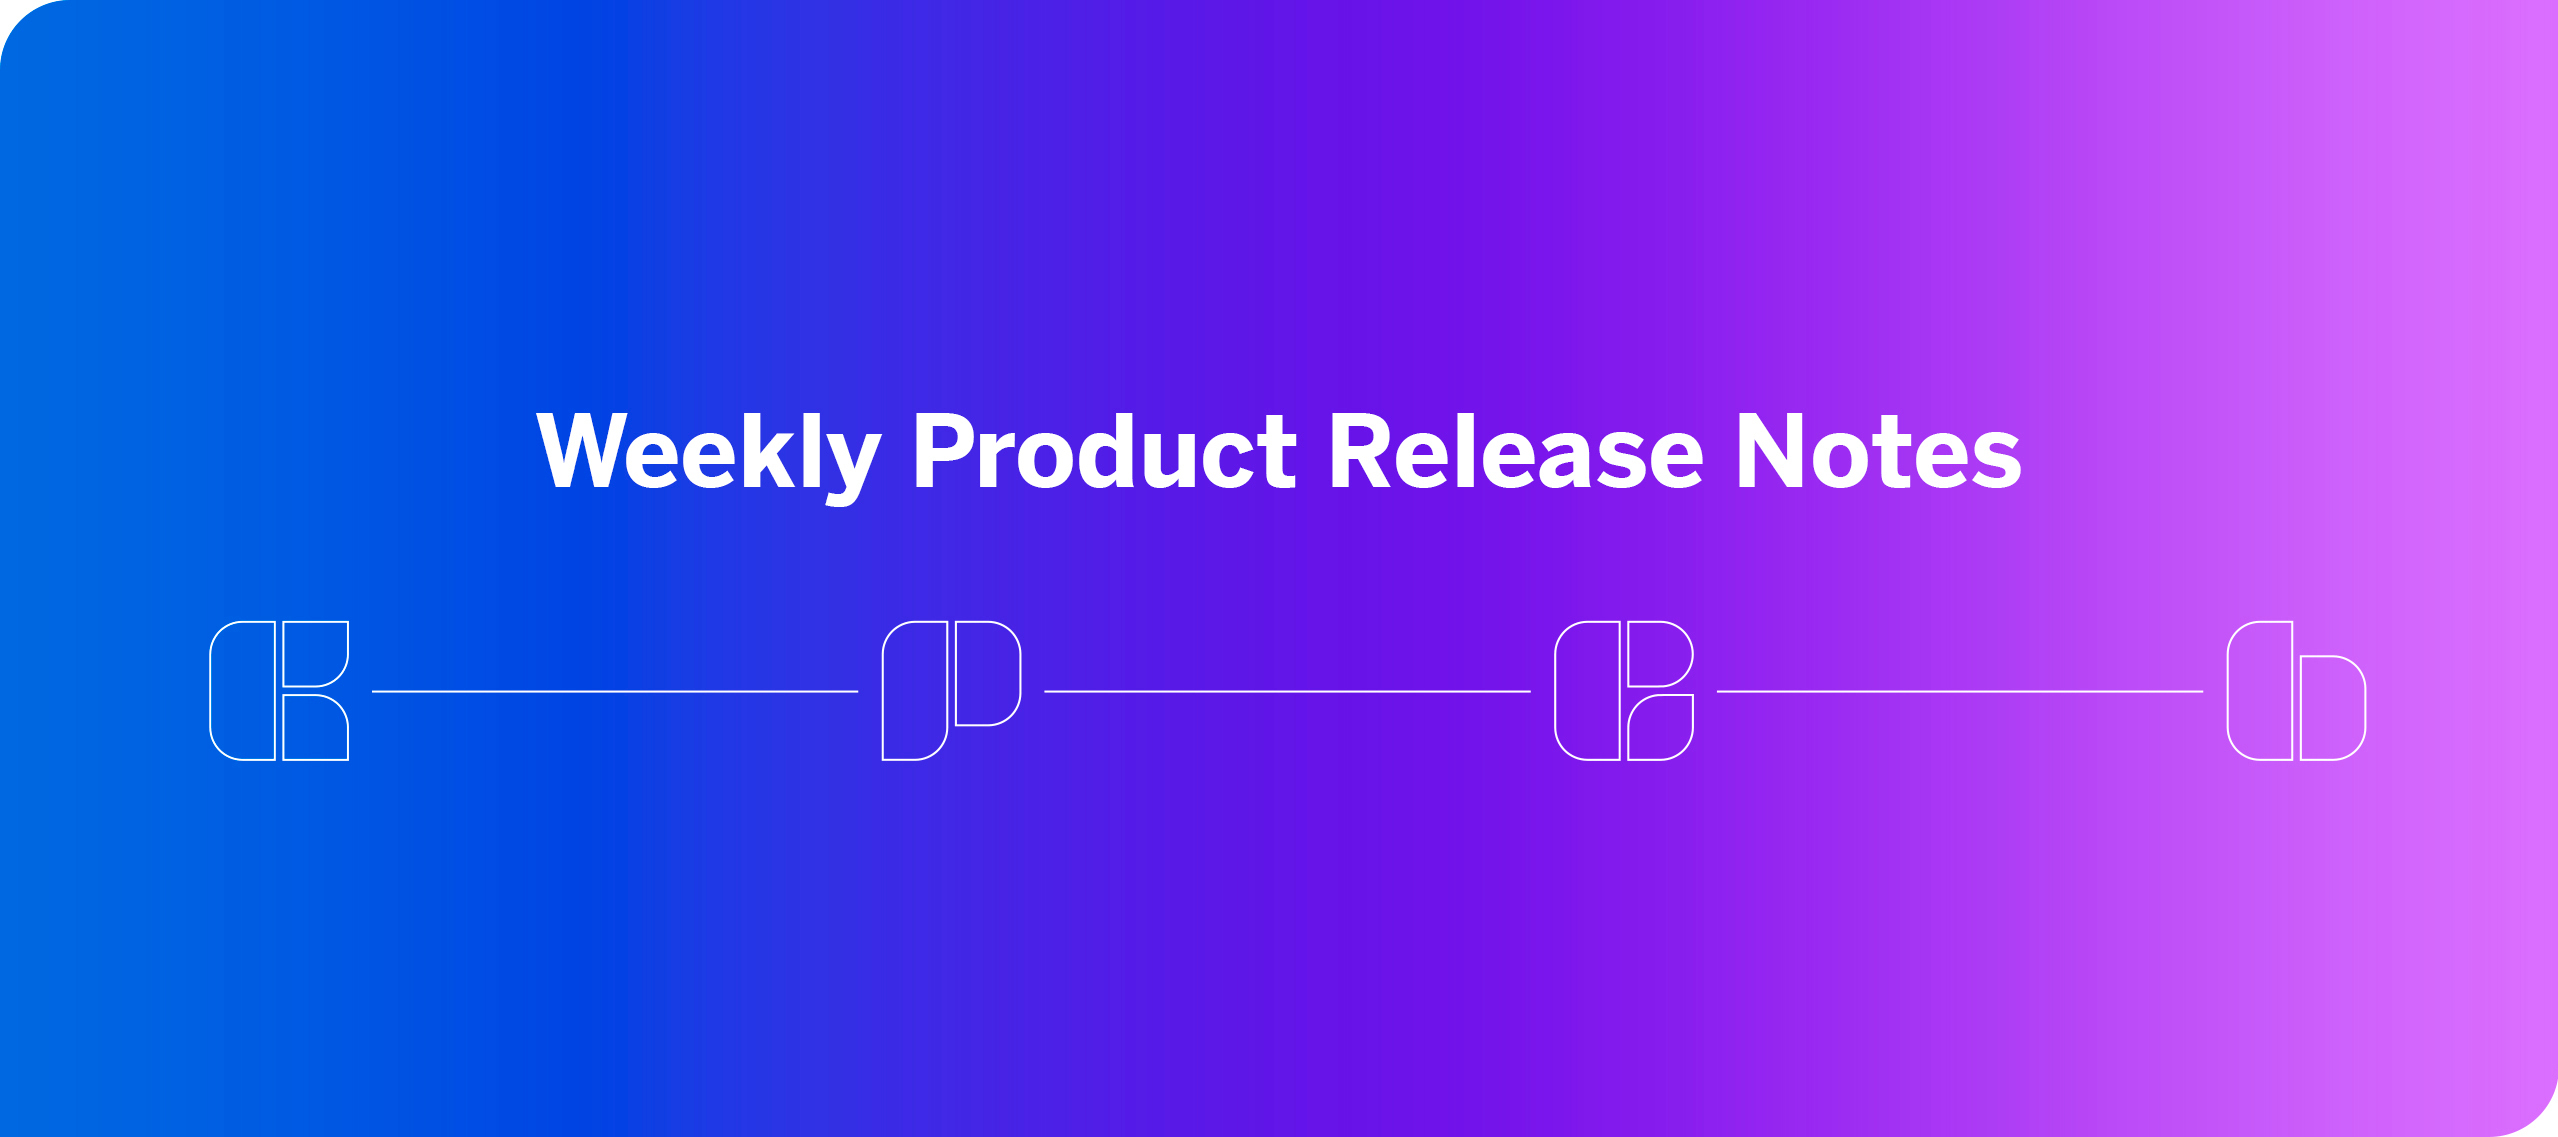 Weekly Product Release Notes - March 22, 2023